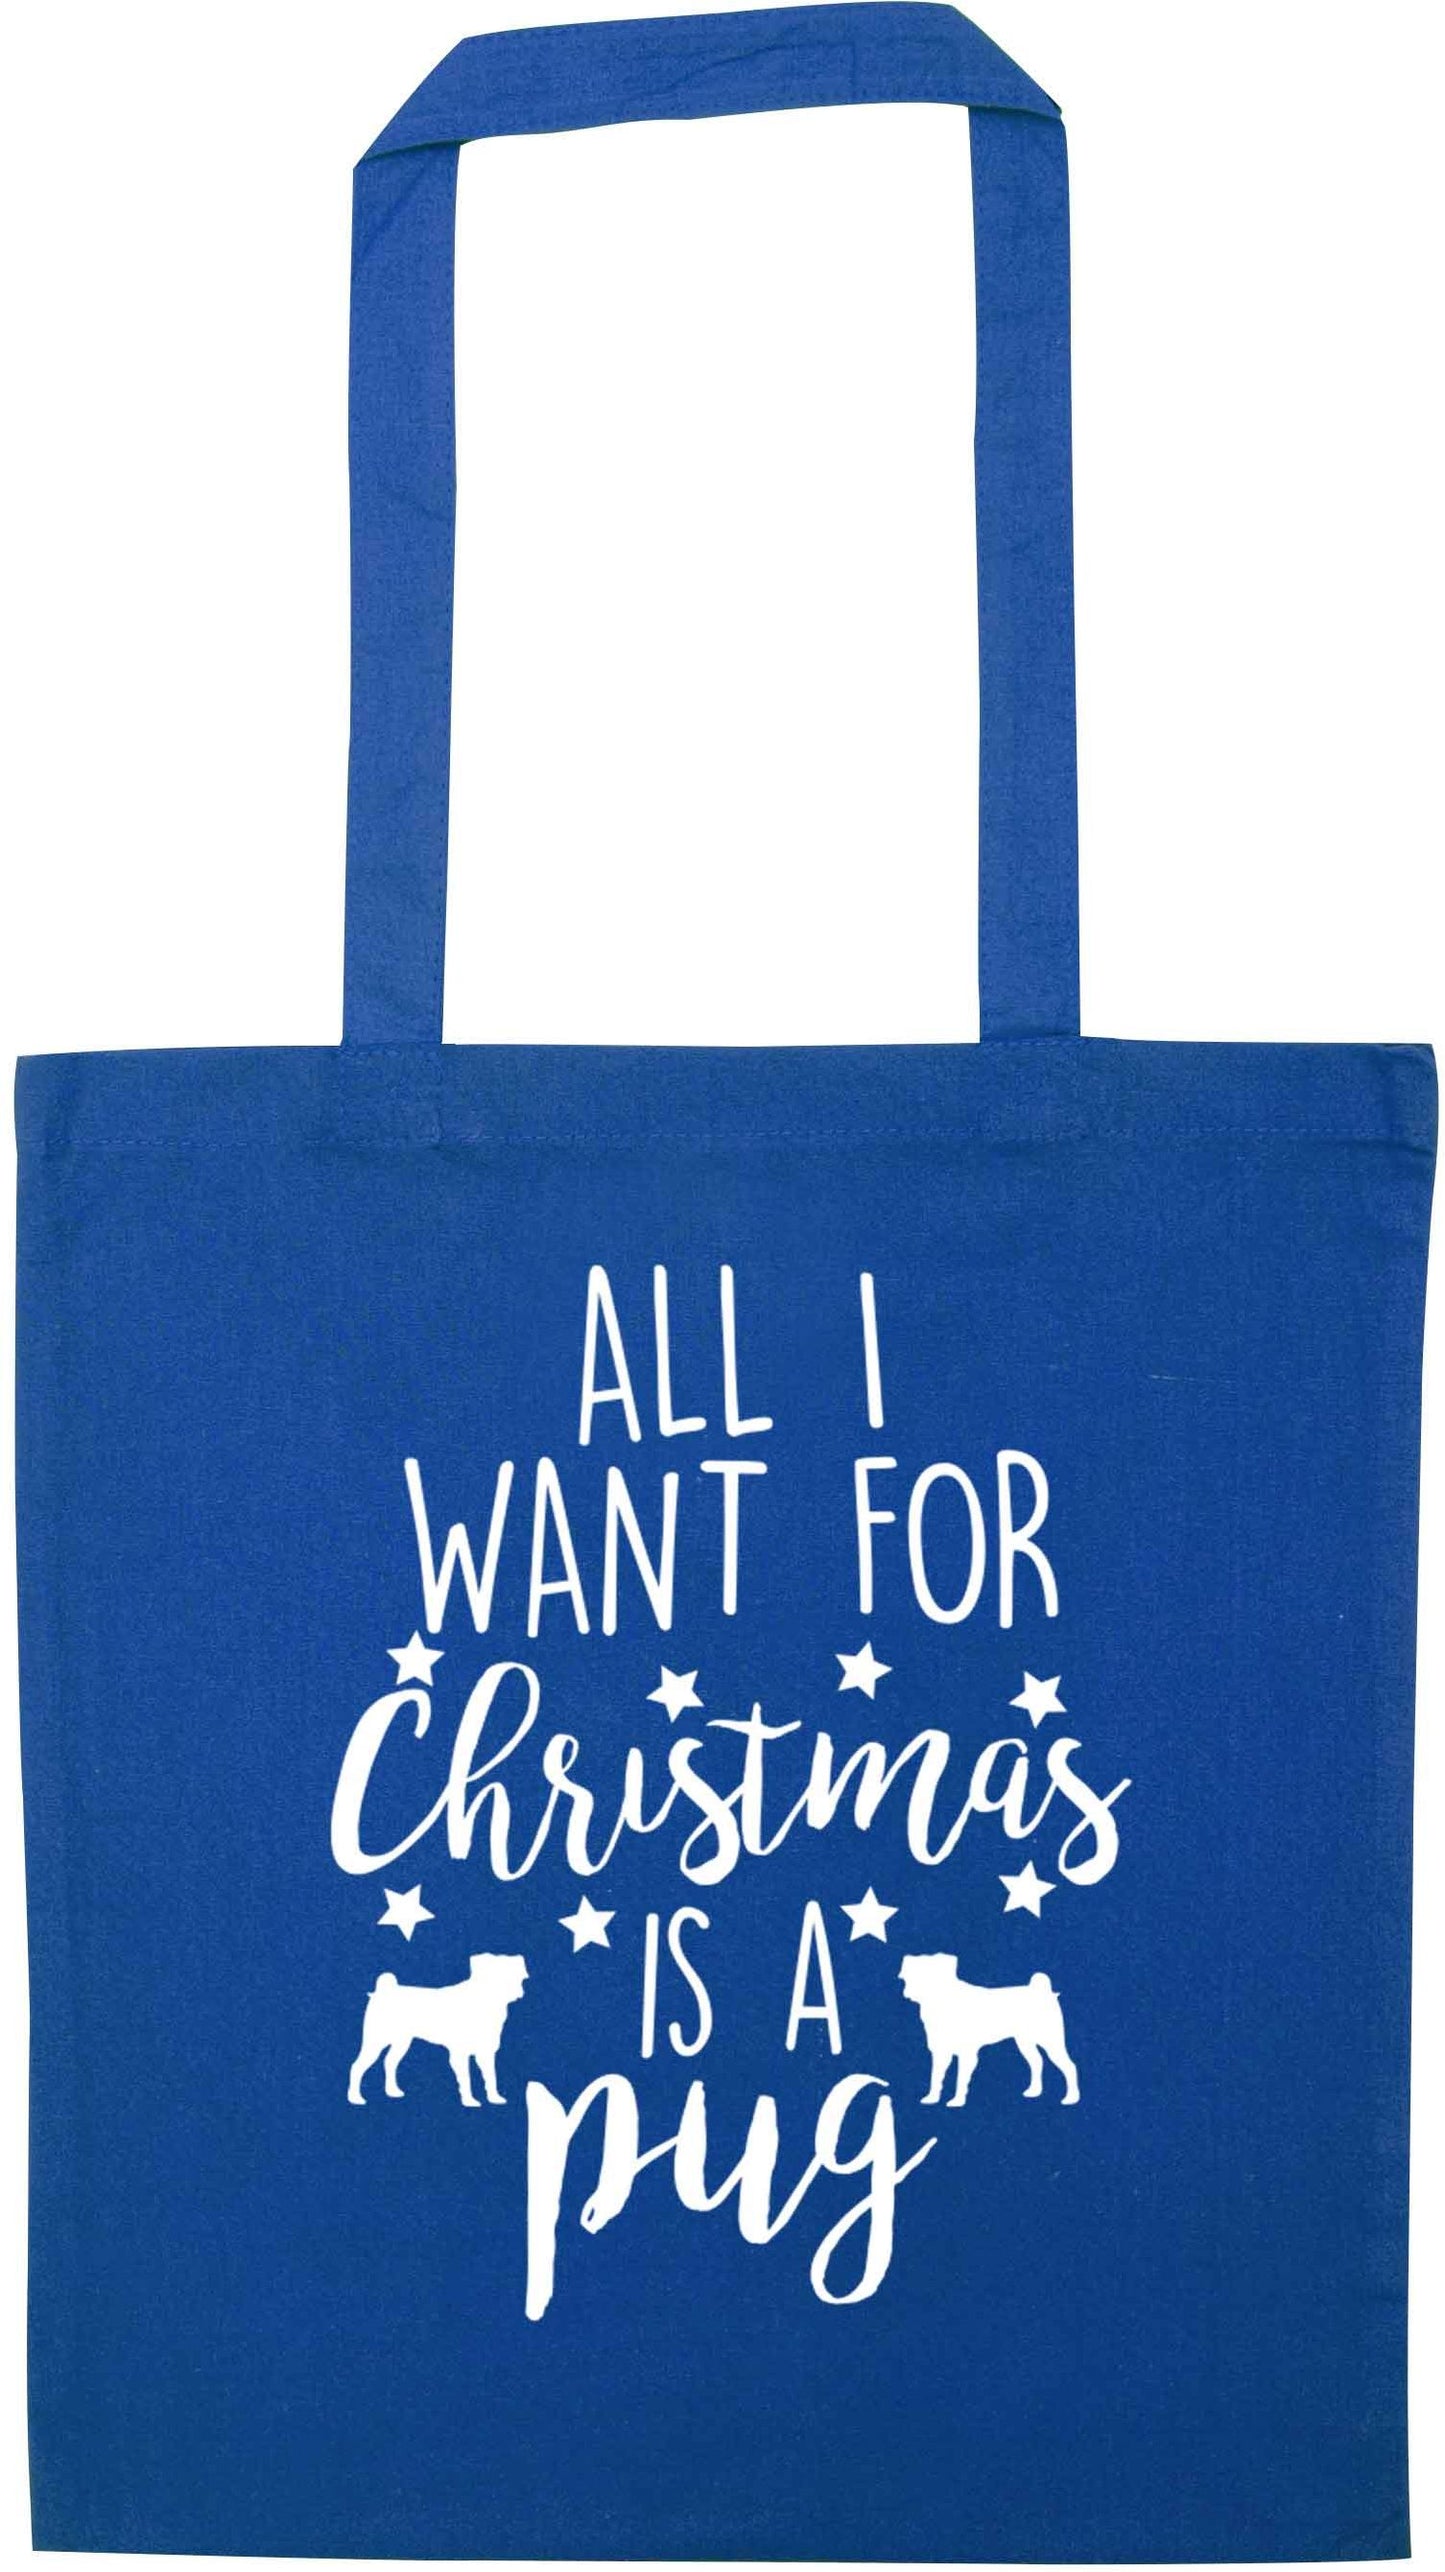 All I want for Christmas is a pug blue tote bag